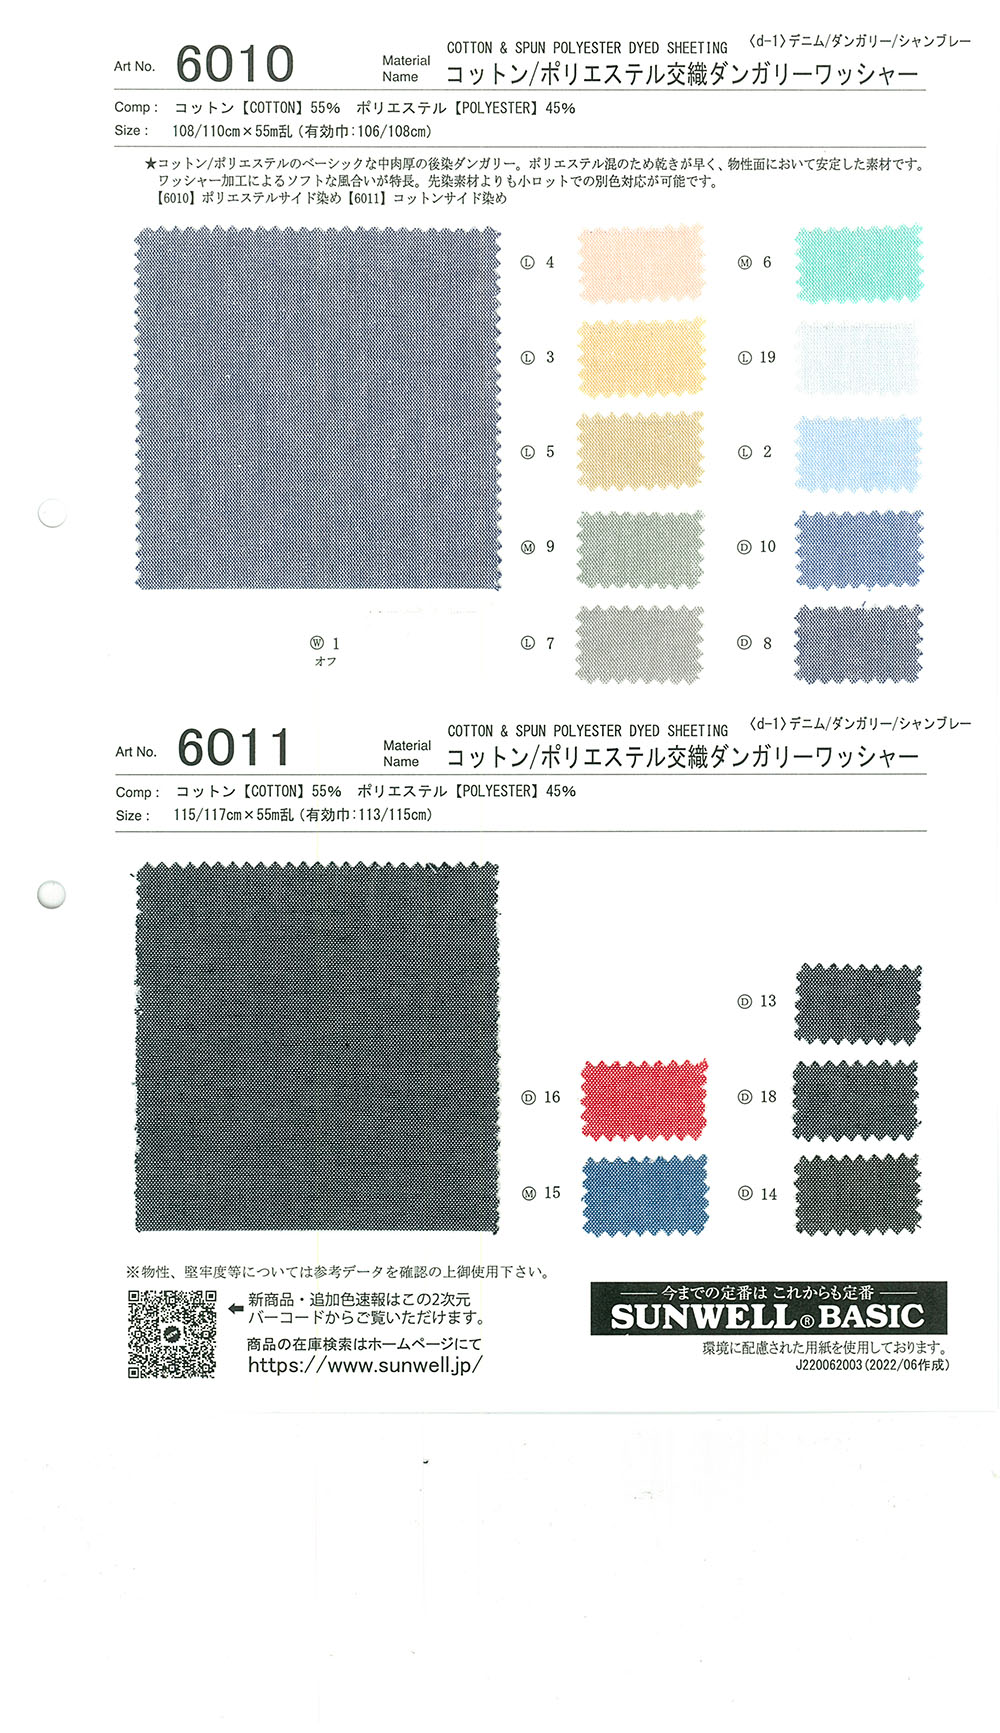 6010 Cotton/Polyester Mixed Weave Dungaree Washer Processing[Textile / Fabric] SUNWELL